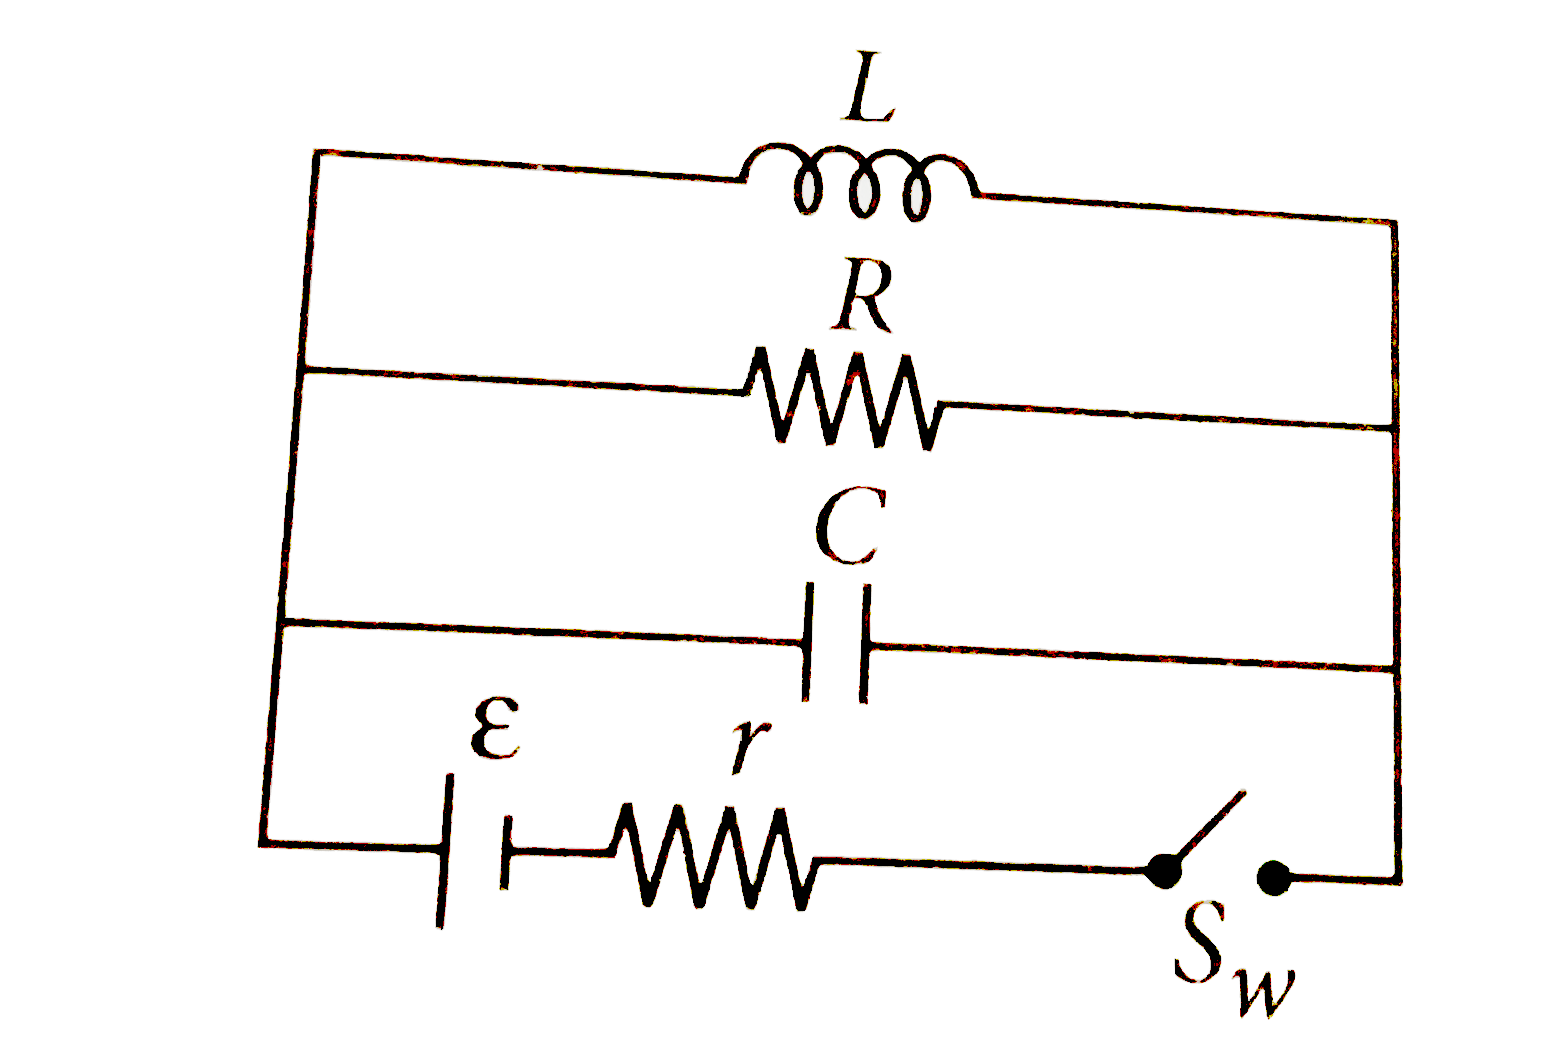 A pure inductor L, a capacitor C and a resistance R are connected across a battery of emf epsilon and  internal resistance r as shown in the figure. The switch S(w) is closed at t = 0, select the correct alternative.